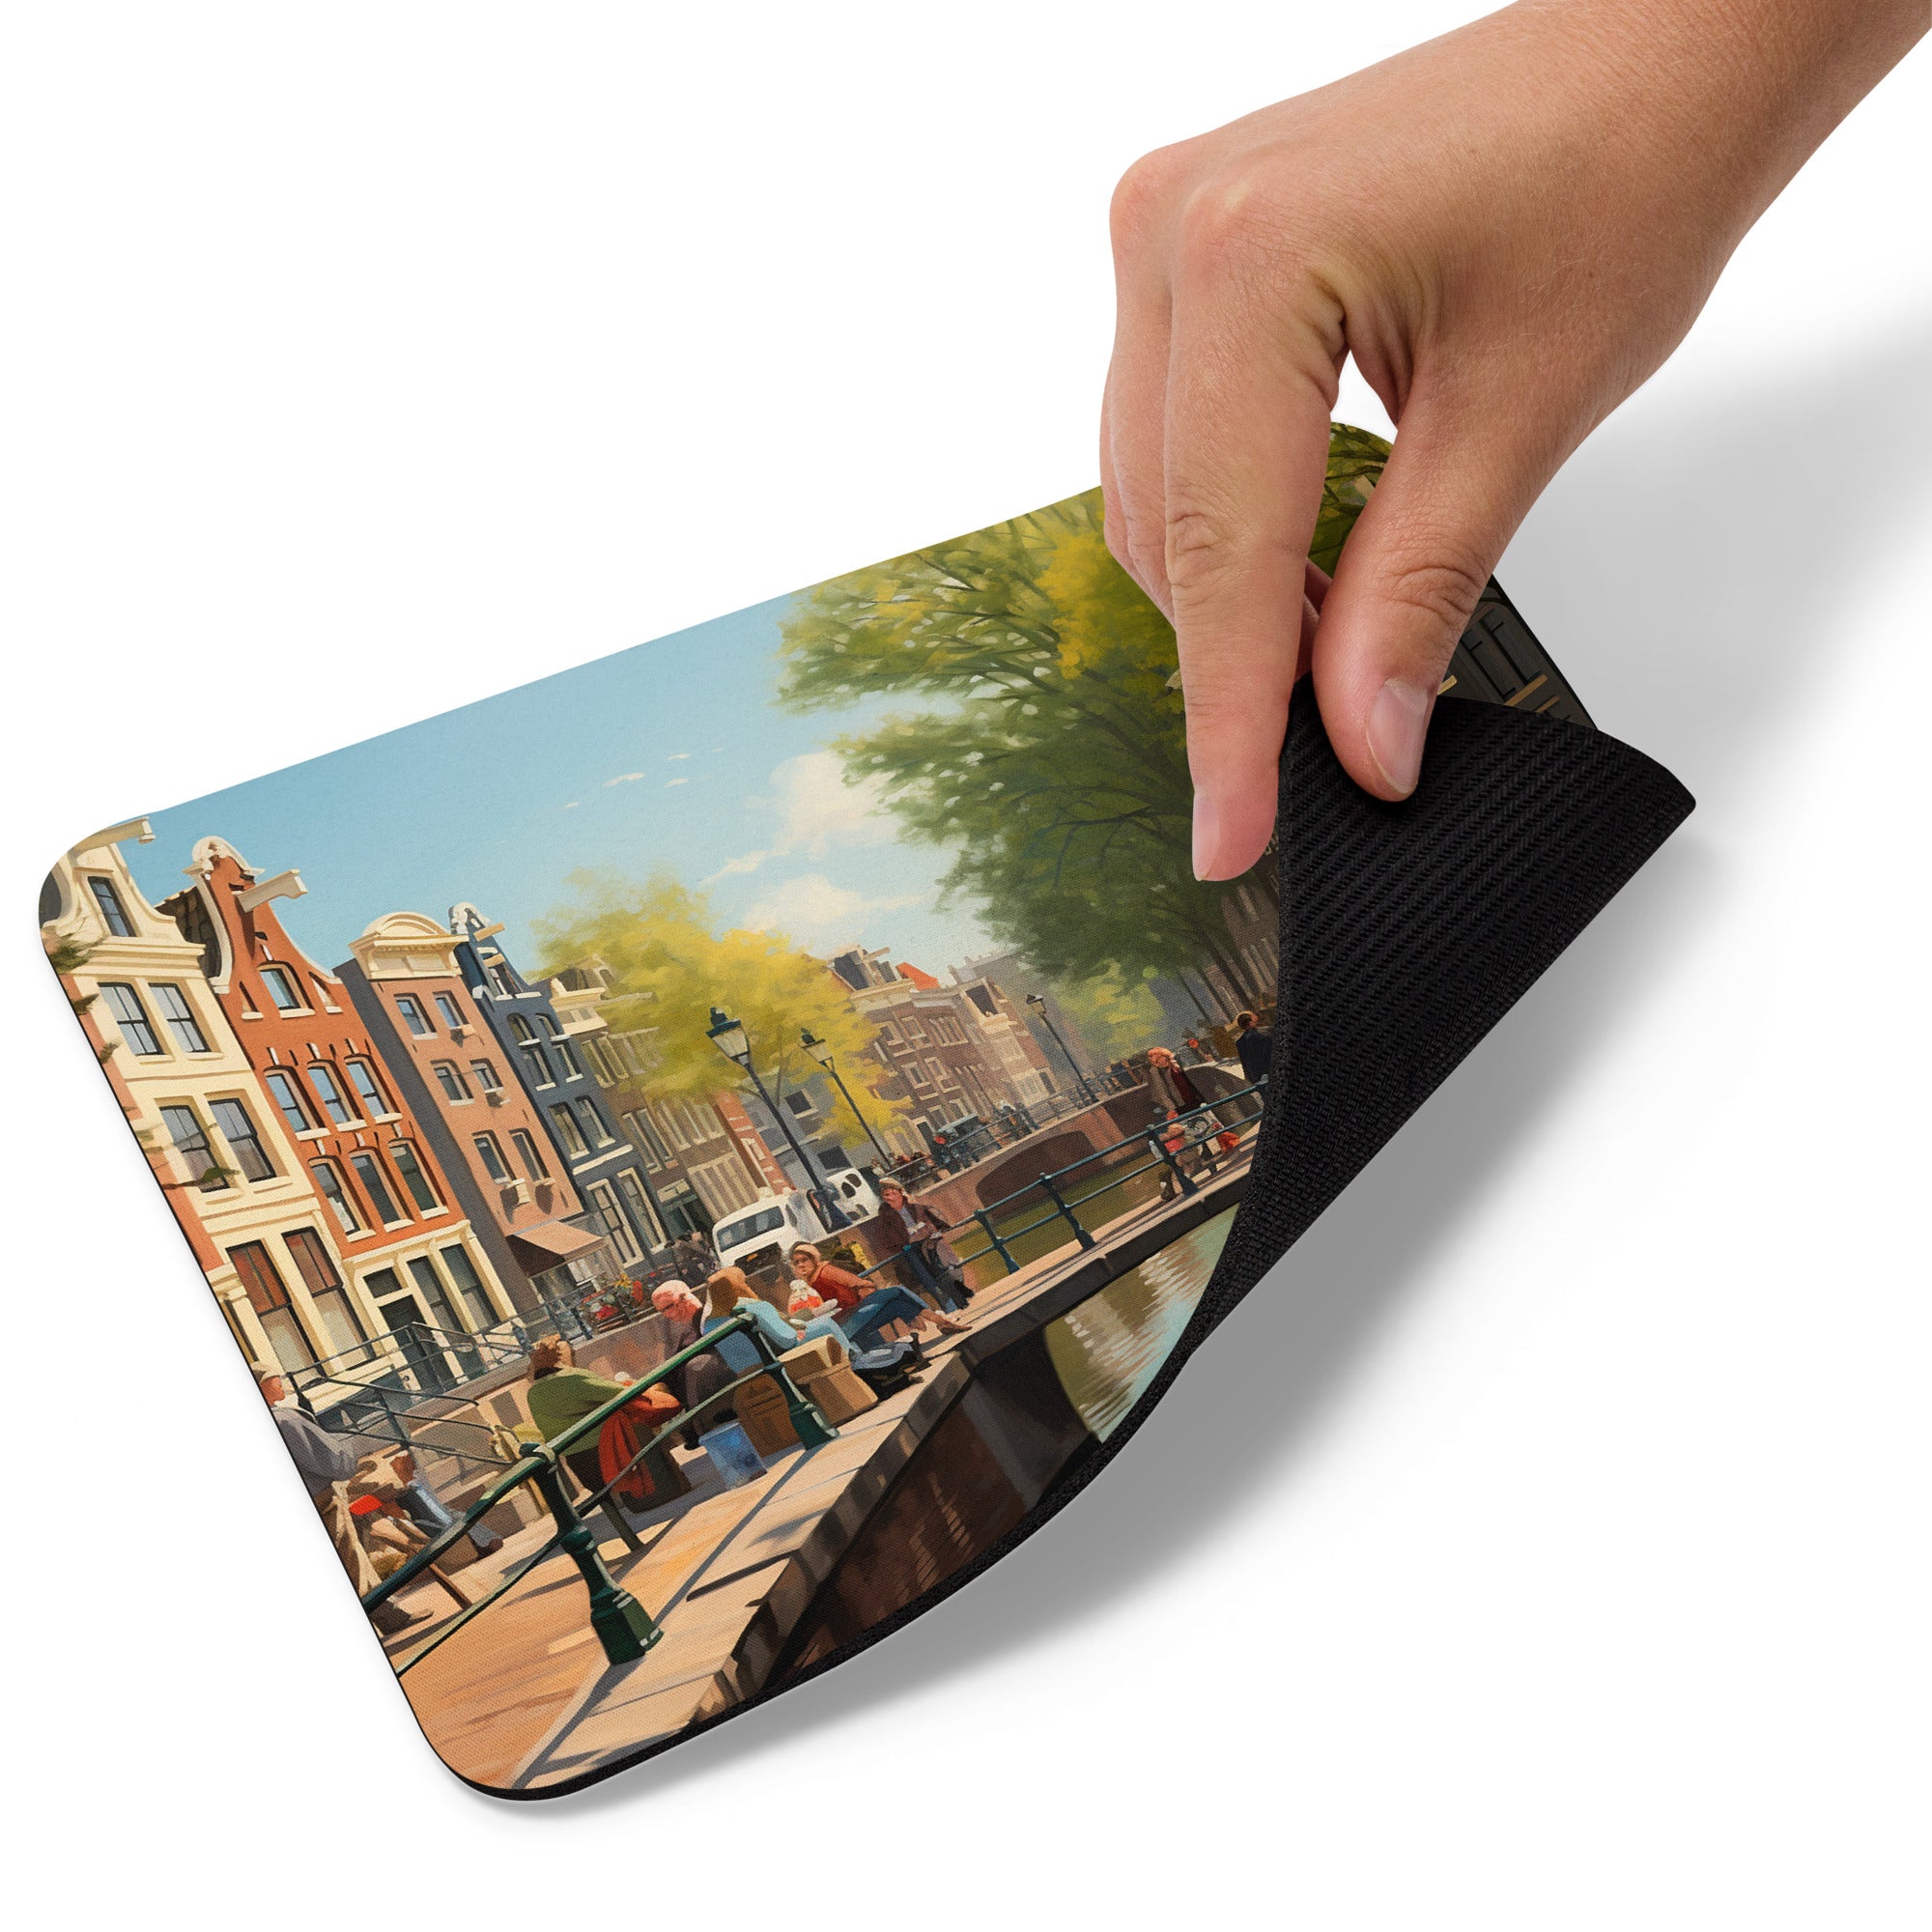 Mouse Pad - Amsterdam Canal | Drese Art